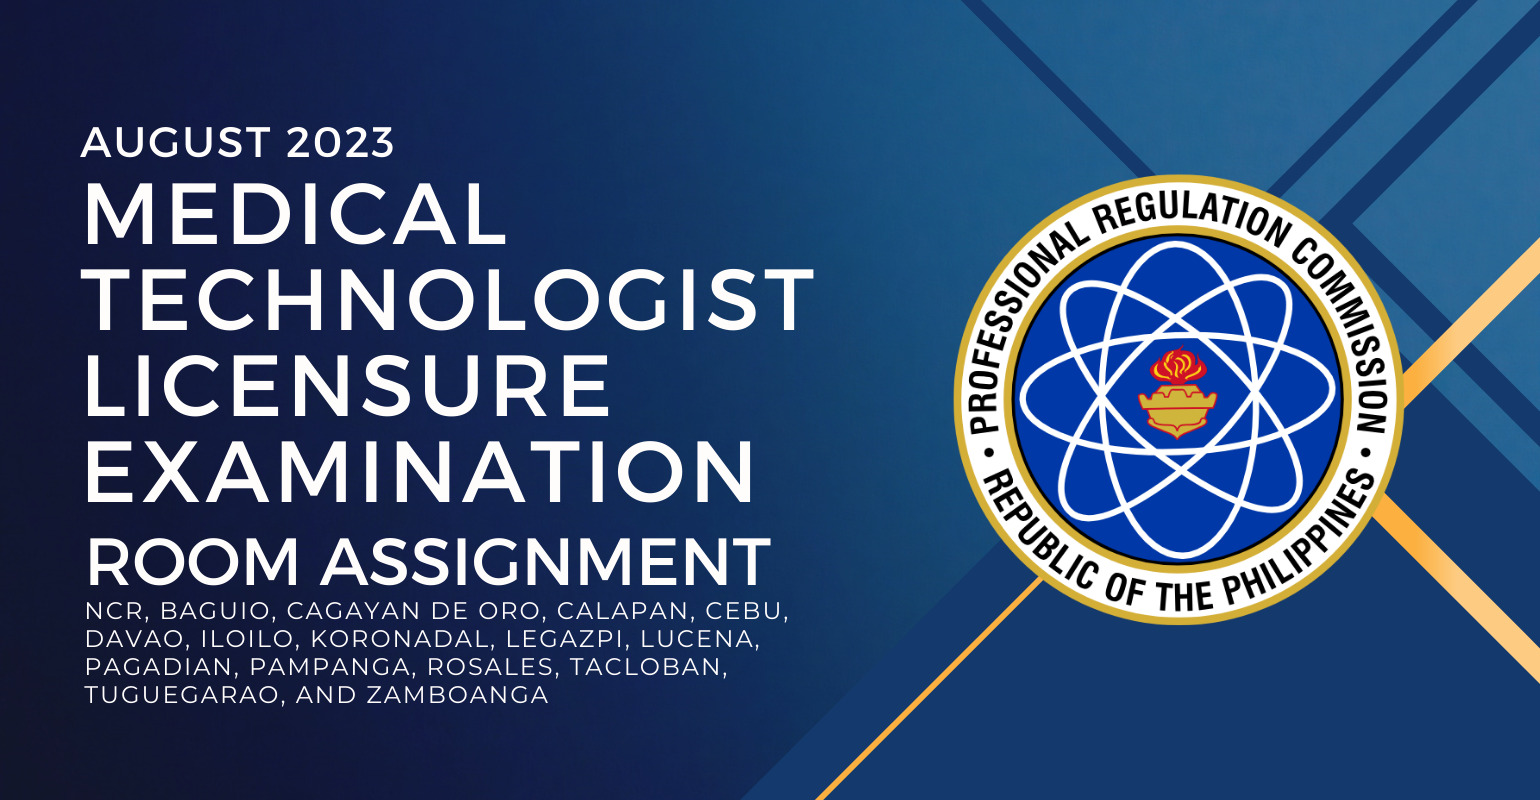 Room Assignment —  August 2023 Medical Technologist Licensure Exam